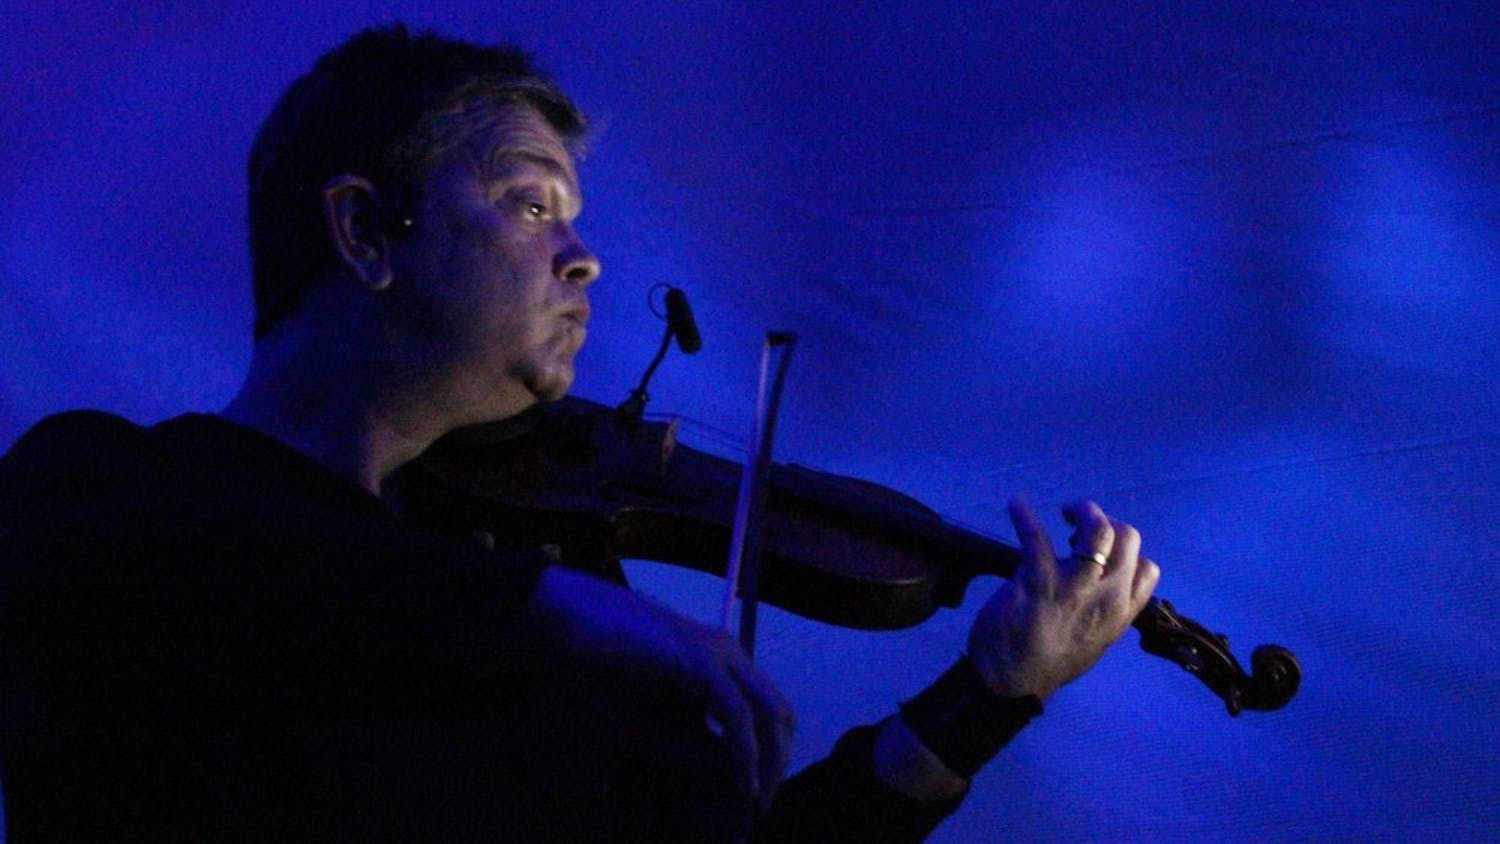 Robin Cox, musician and faculty with the Department of Music and Arts Technology at IUPUI, plays his violin during the "Nearing the End of the Hourglass" dance performance on Thursday. His wife Stephanie Nugent and her students danced nearby.